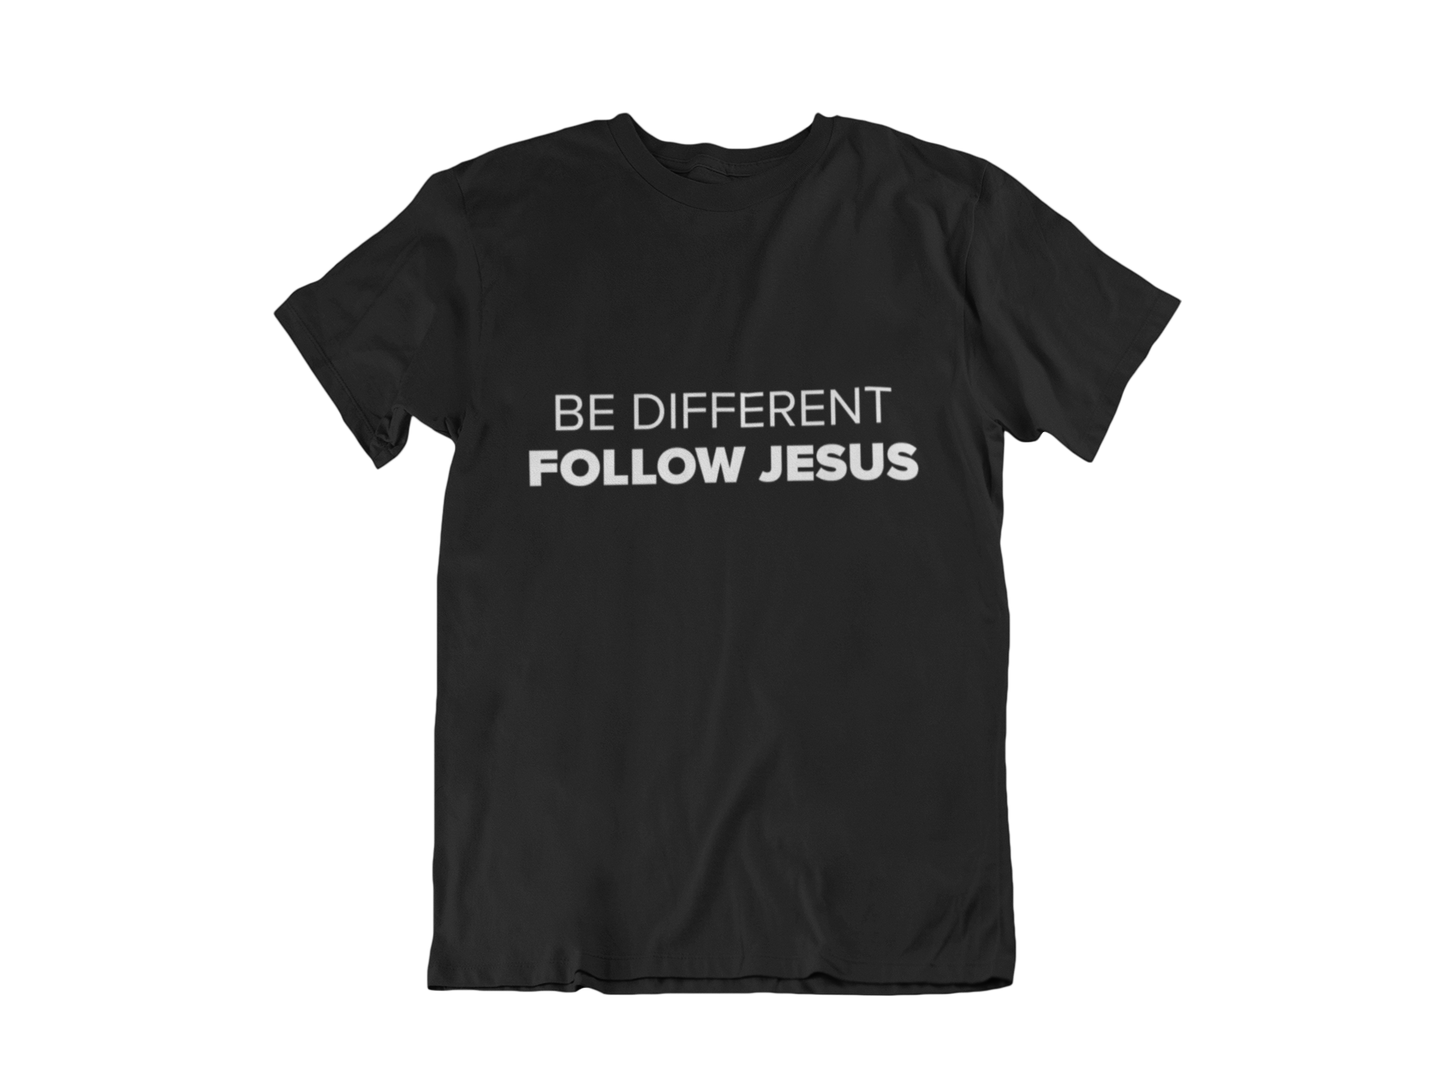 BE DIFFERENT FOLLOW JESUS BLACK - CHRISTIAN CLOTHING